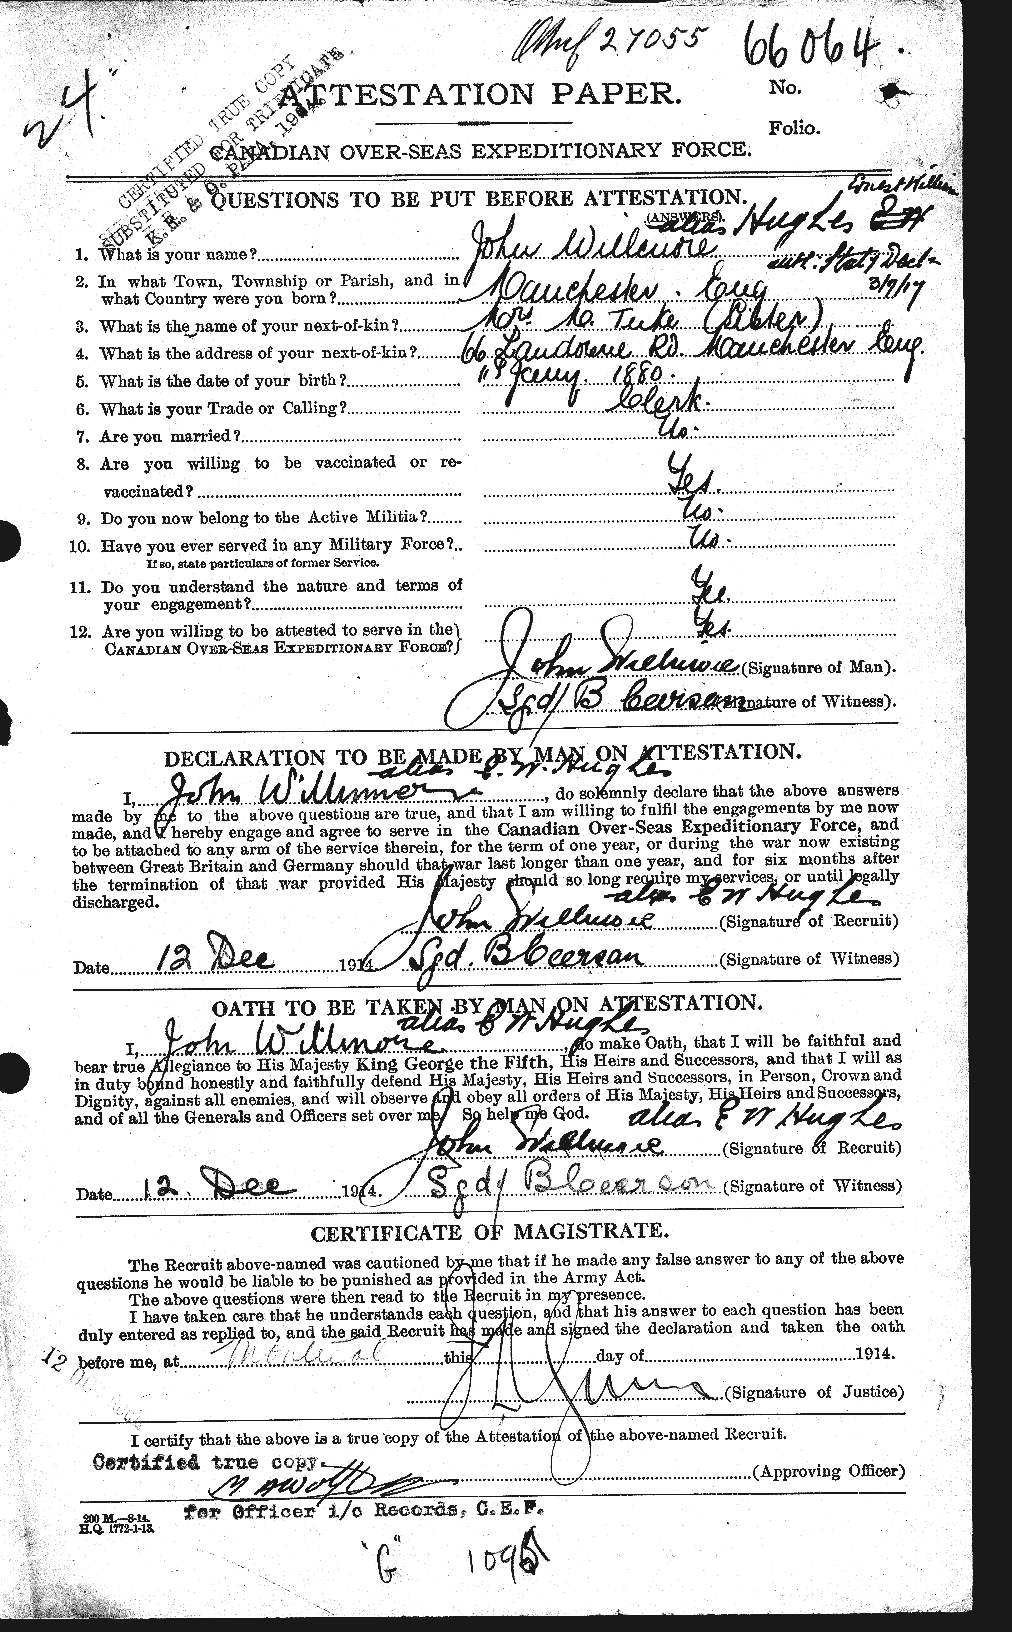 Personnel Records of the First World War - CEF 403756a